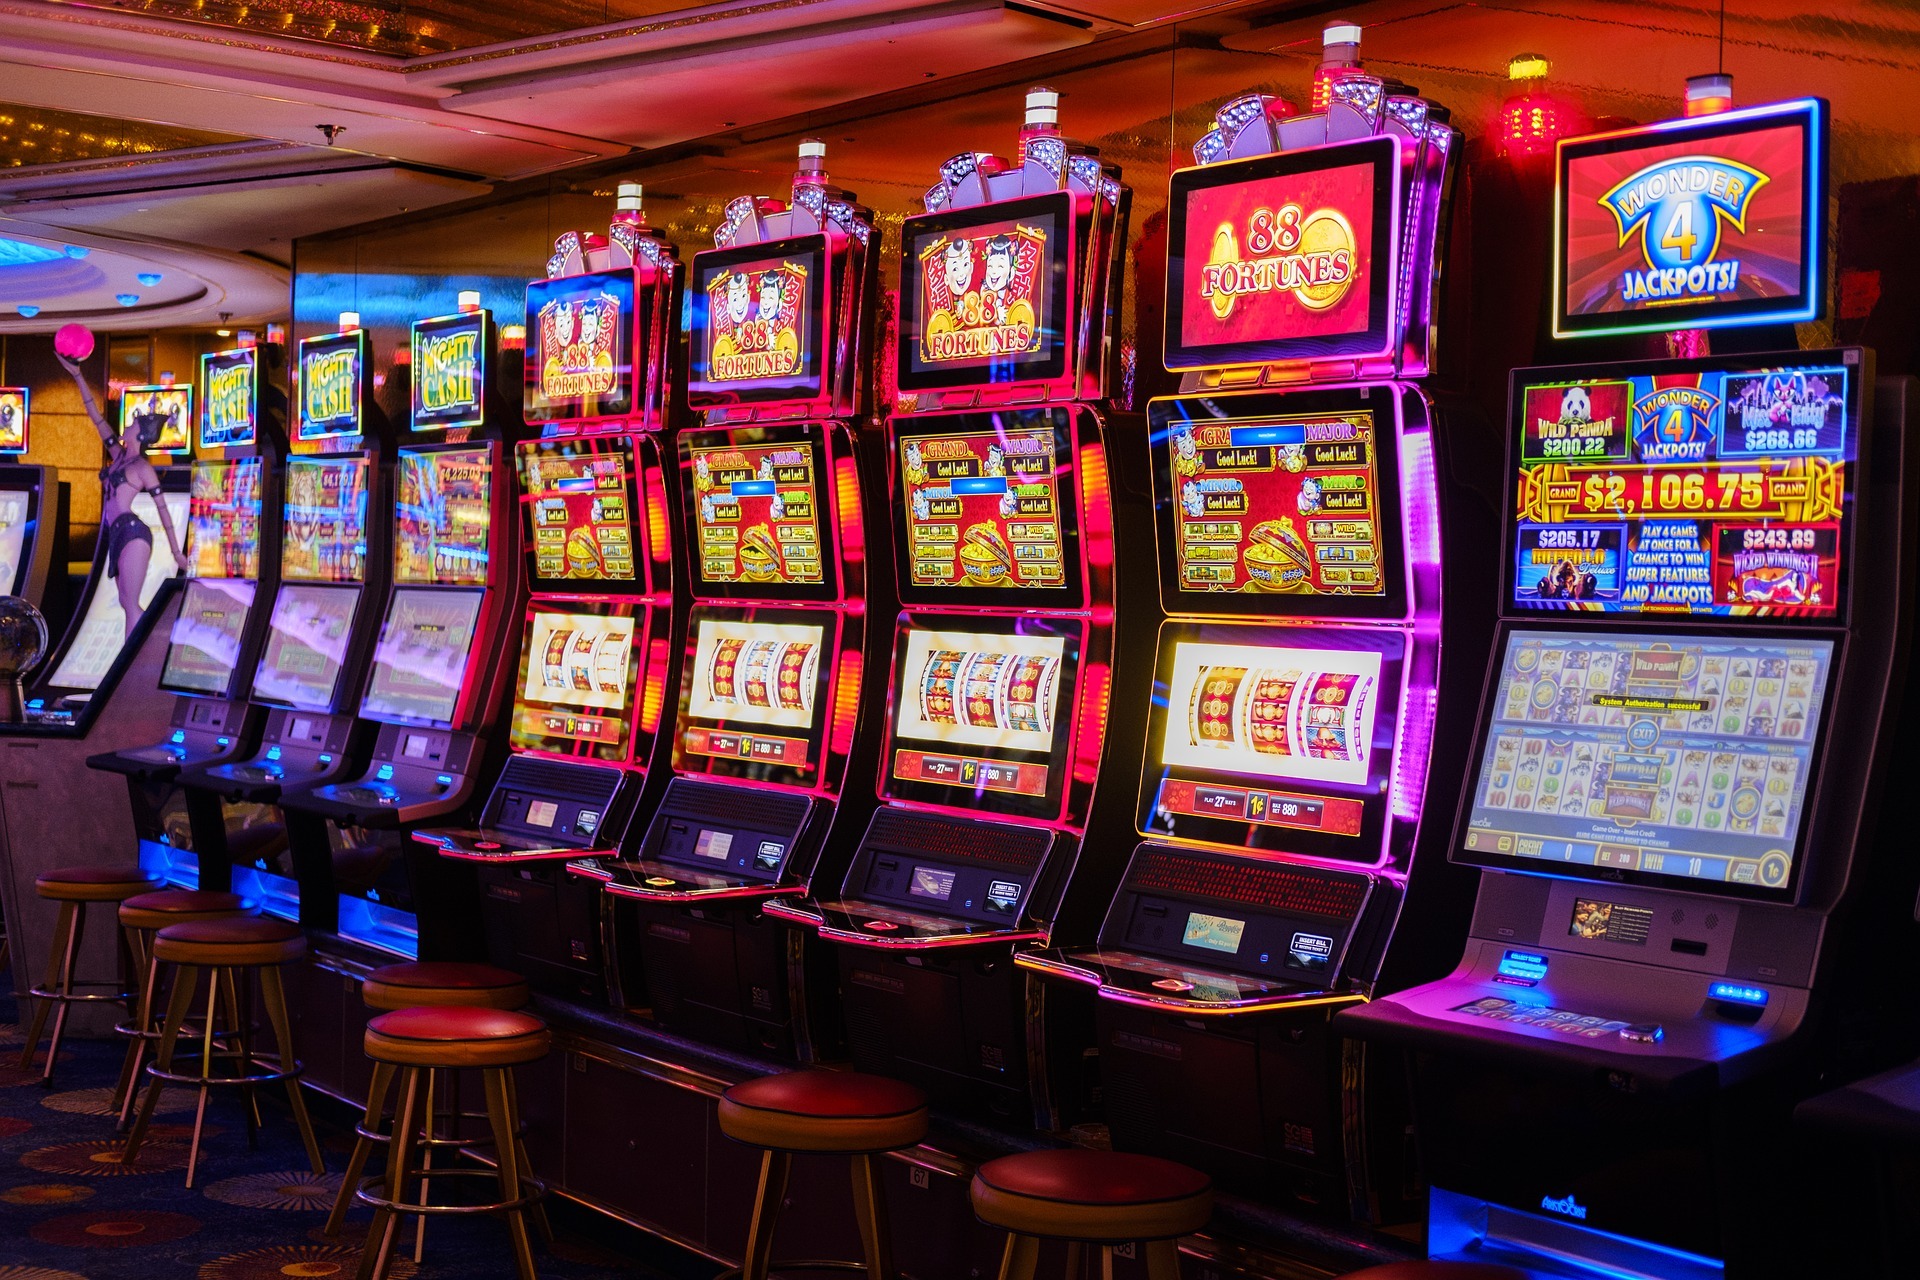 Have You Heard? casino online Is Your Best Bet To Grow